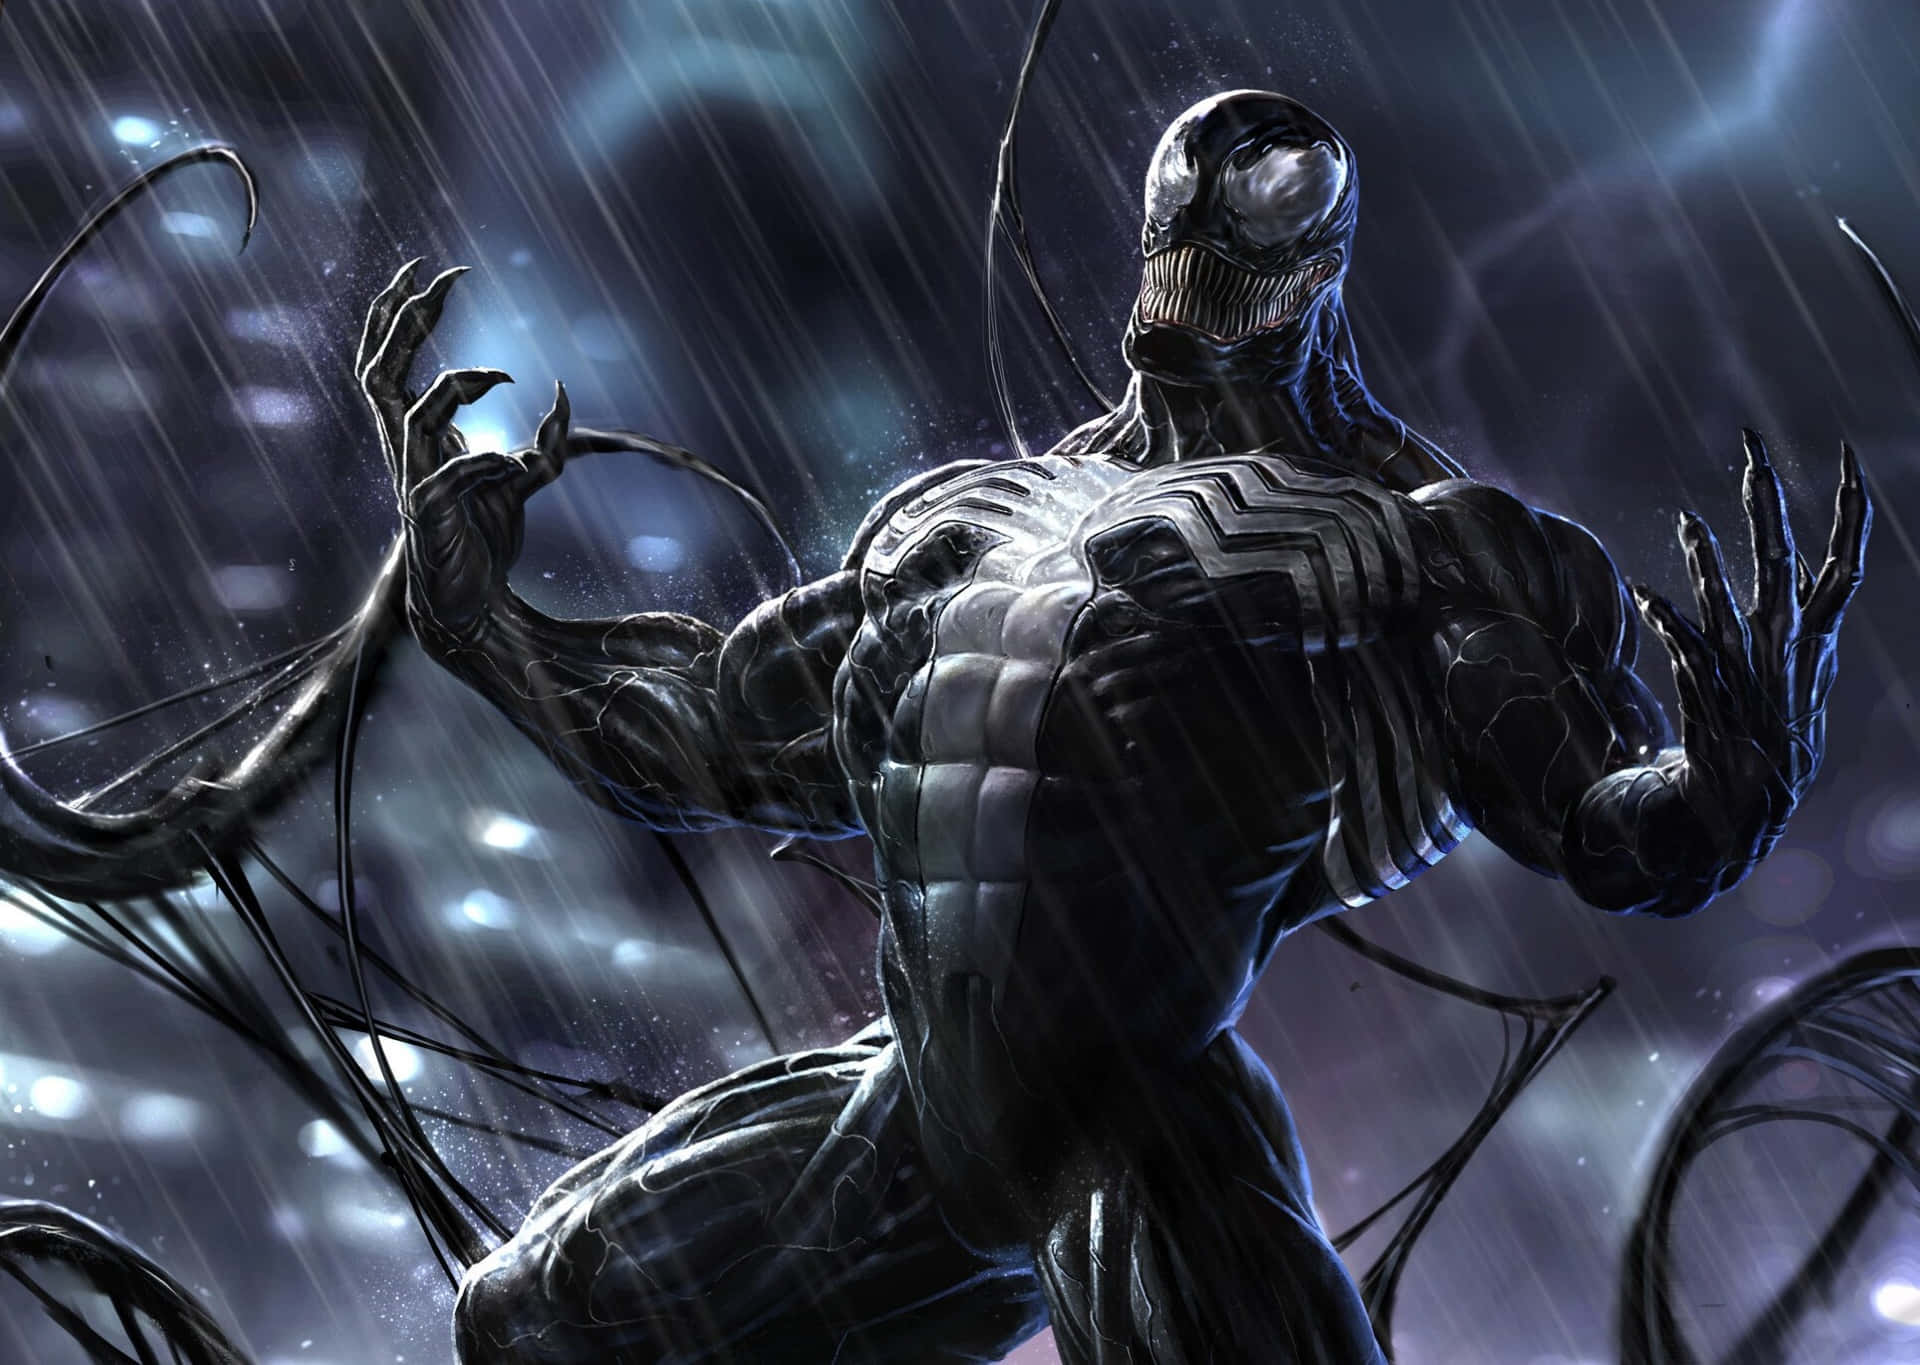 "Embrace The Symbiote"